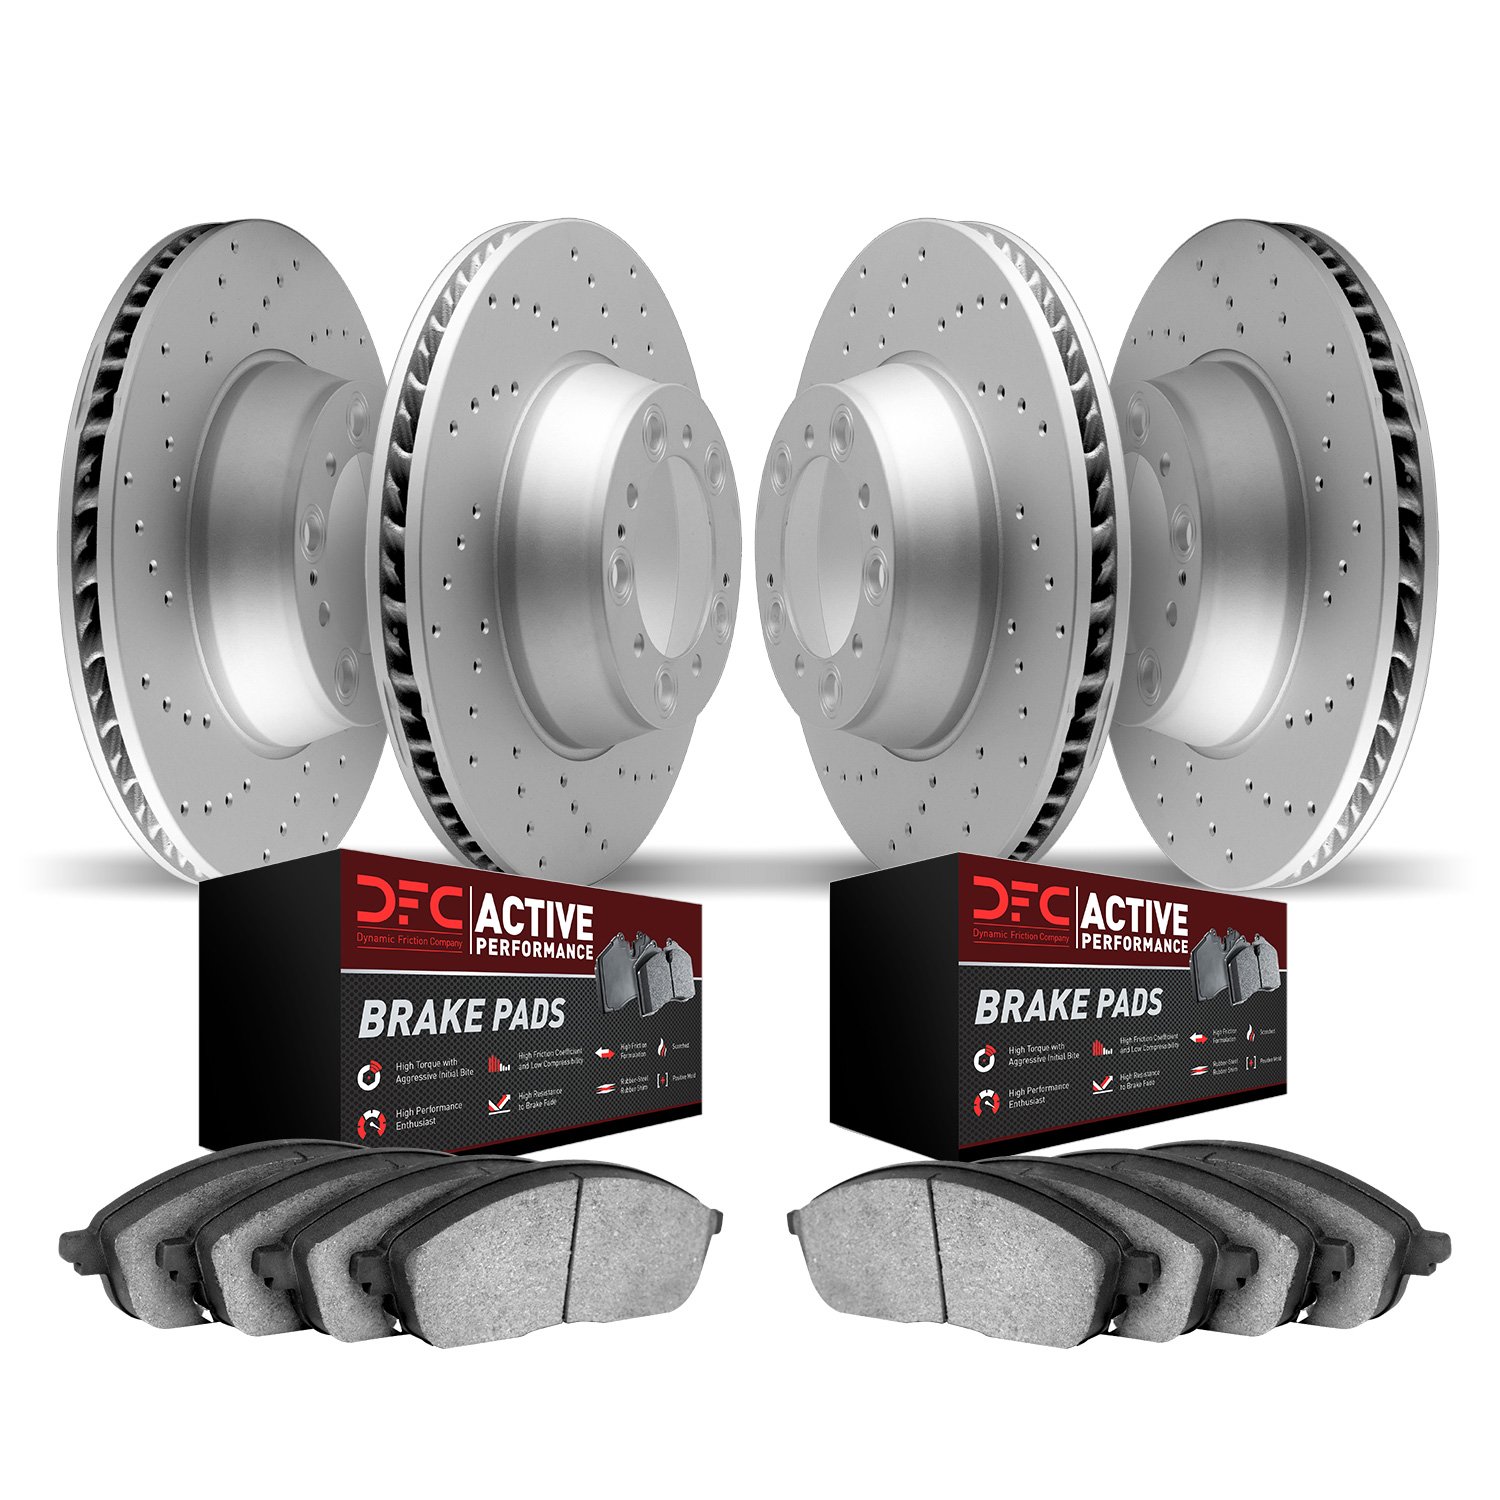 2704-31066 Geoperformance Drilled Brake Rotors with Active Performance Pads Kit, 2006-2007 BMW, Position: Front and Rear